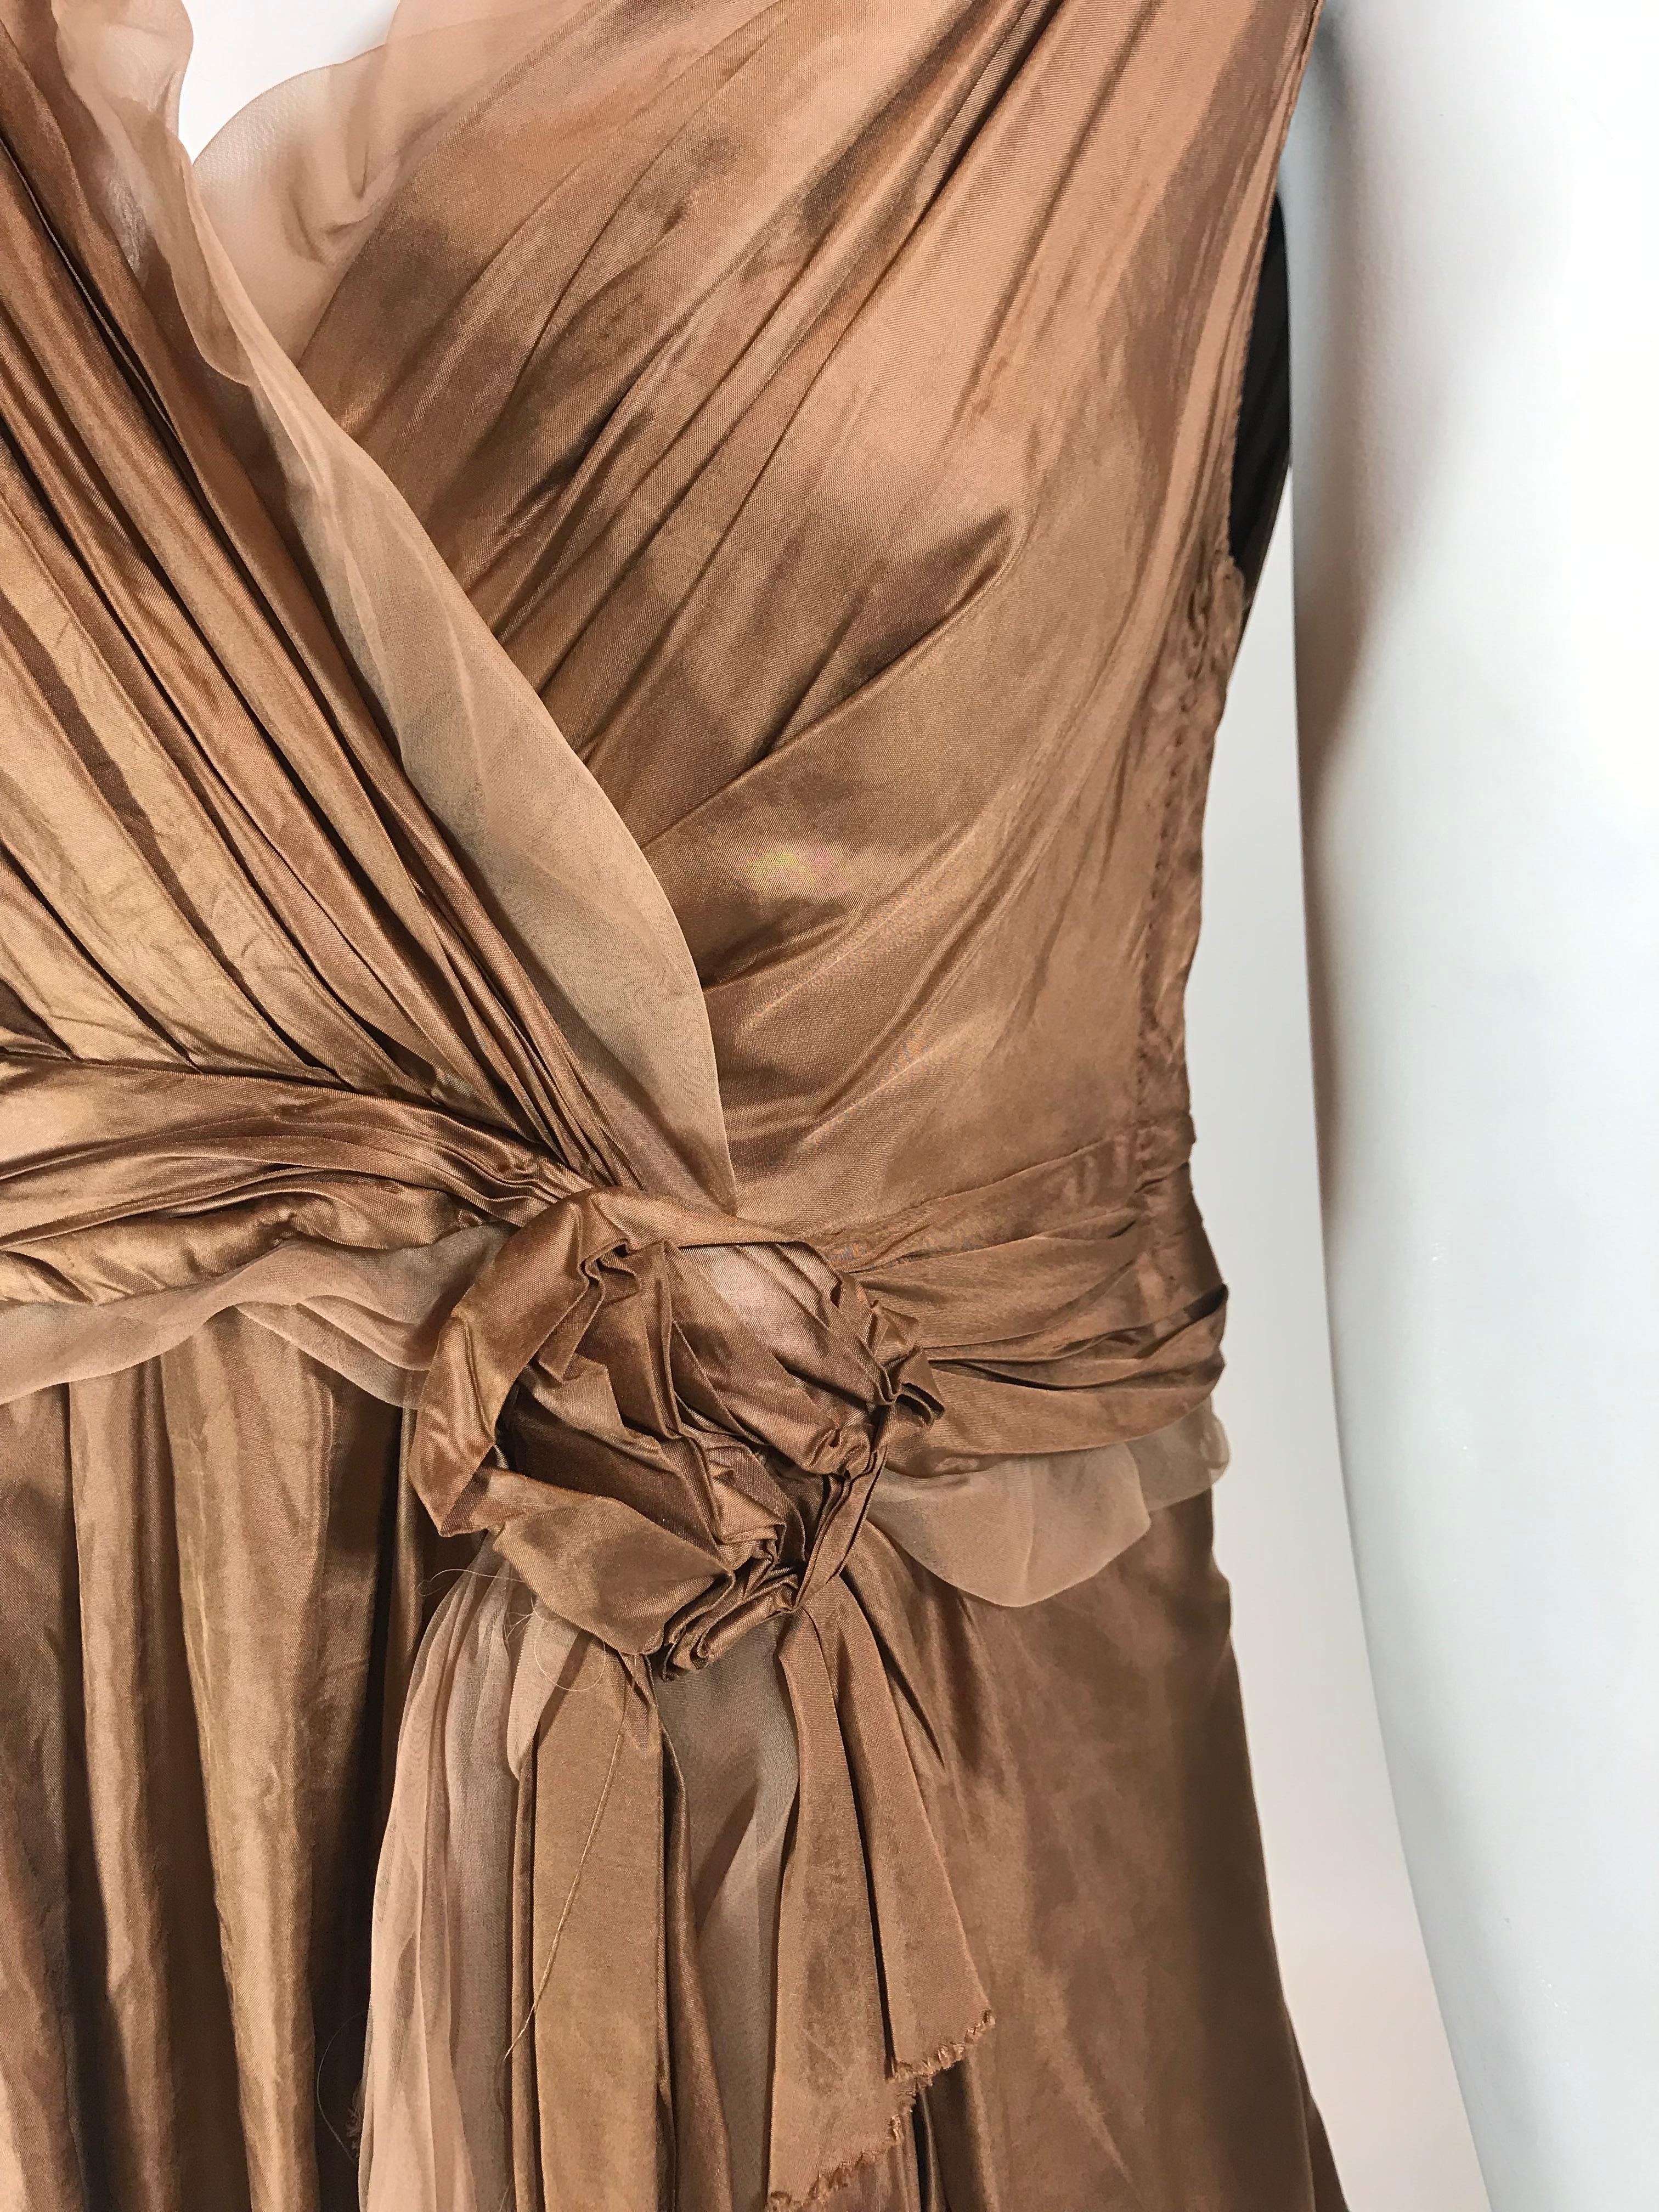 Metallic rose gold-tone sleeveless A-line top with surplice neck, floral adornment at waist, tonal chiffon trim, Monogram lace trim at hem and concealed snap closures at side.